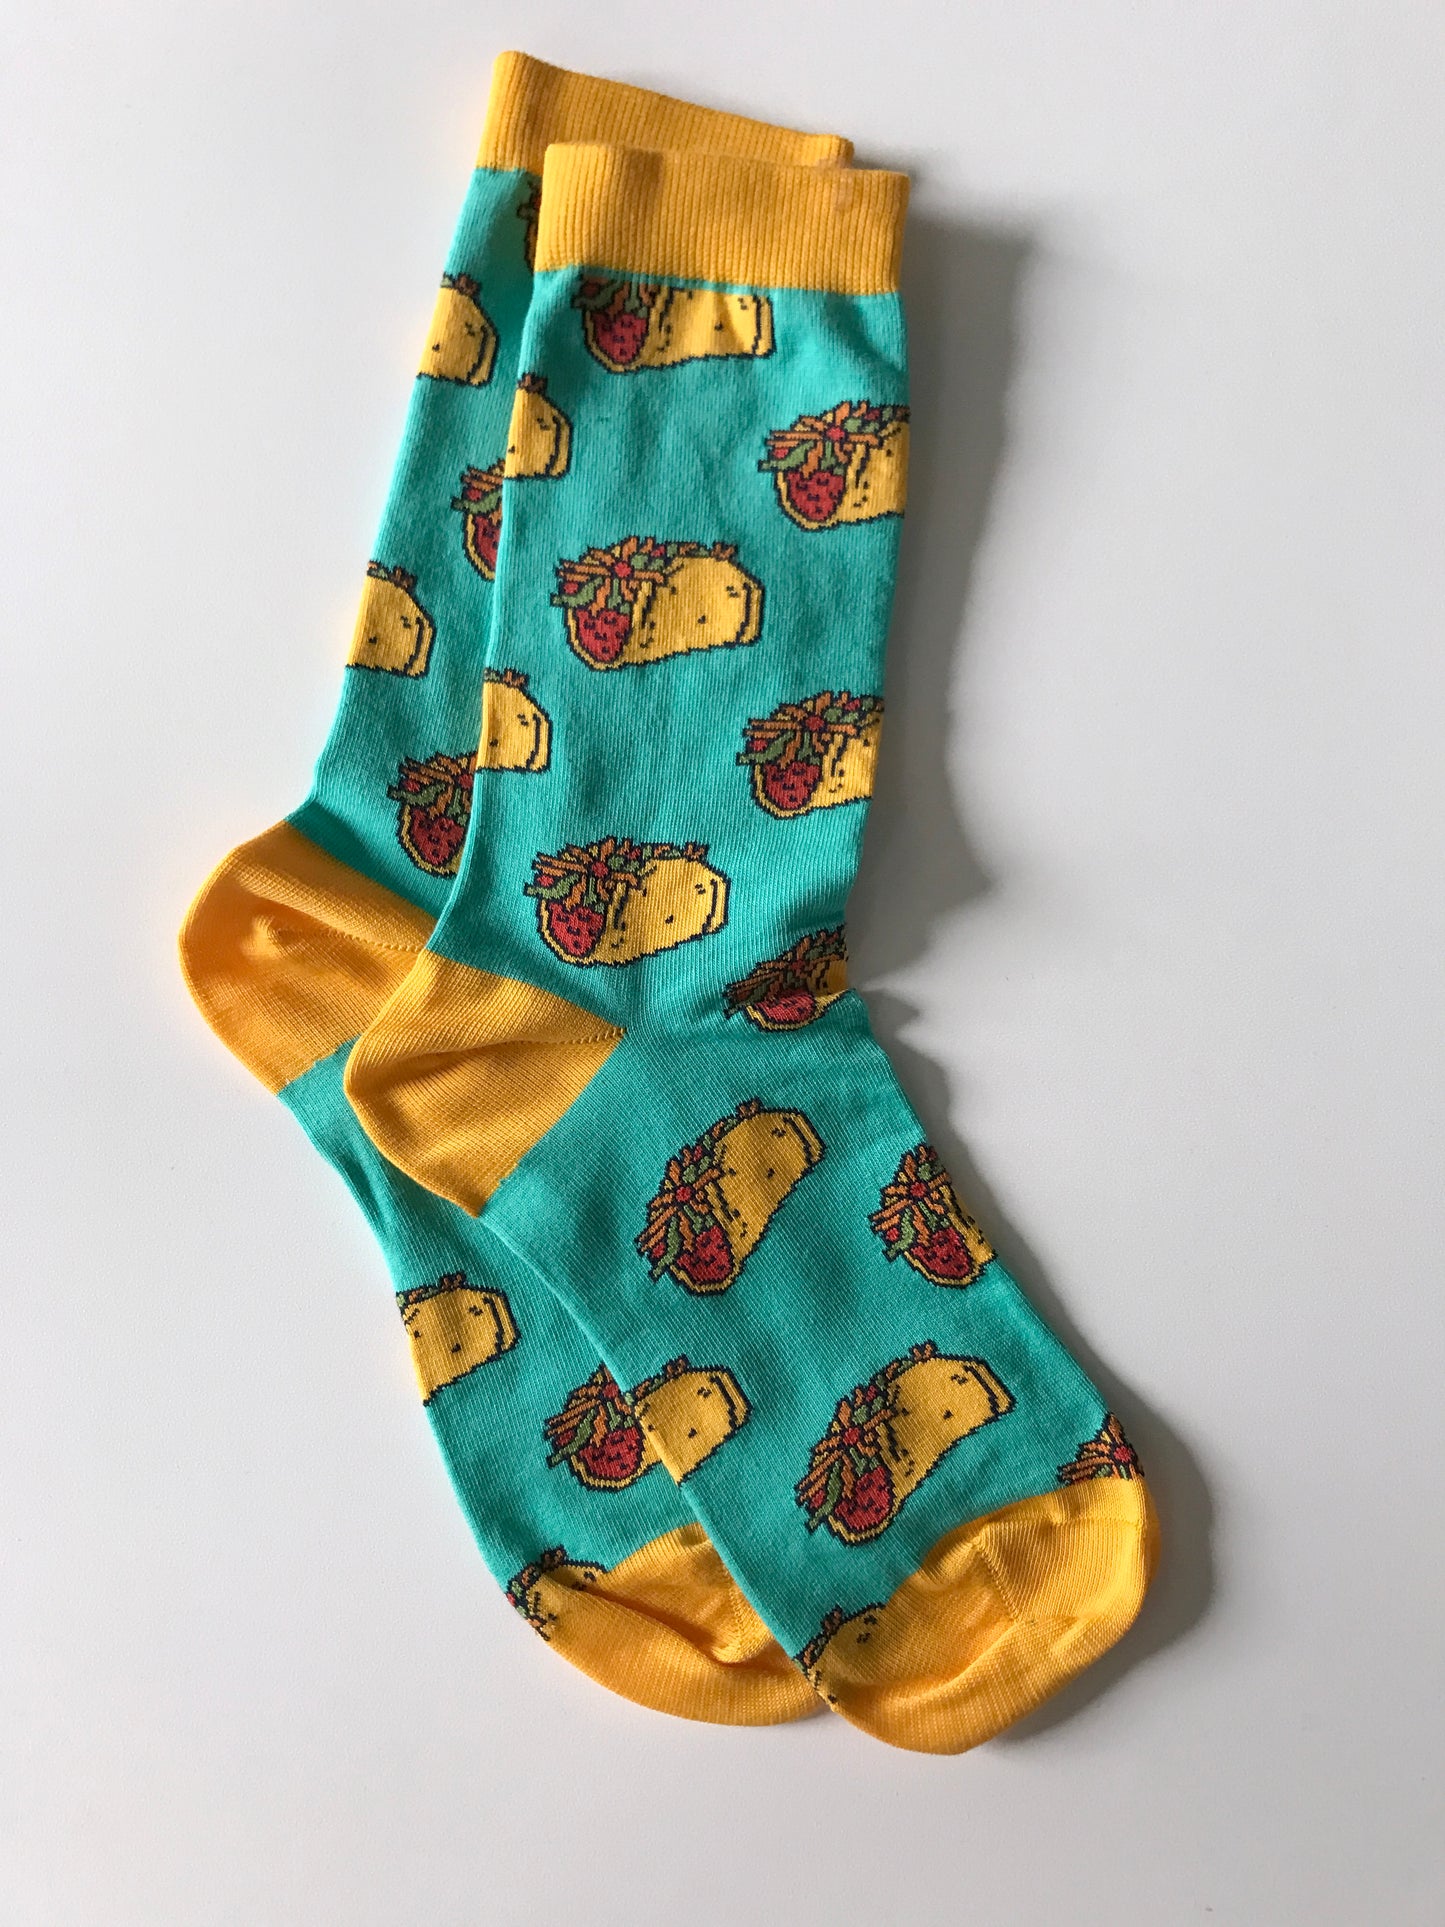 A pair of aqua-blue socks is patterned with hard-shell tacos and has yellow cuffs, heels and toes.